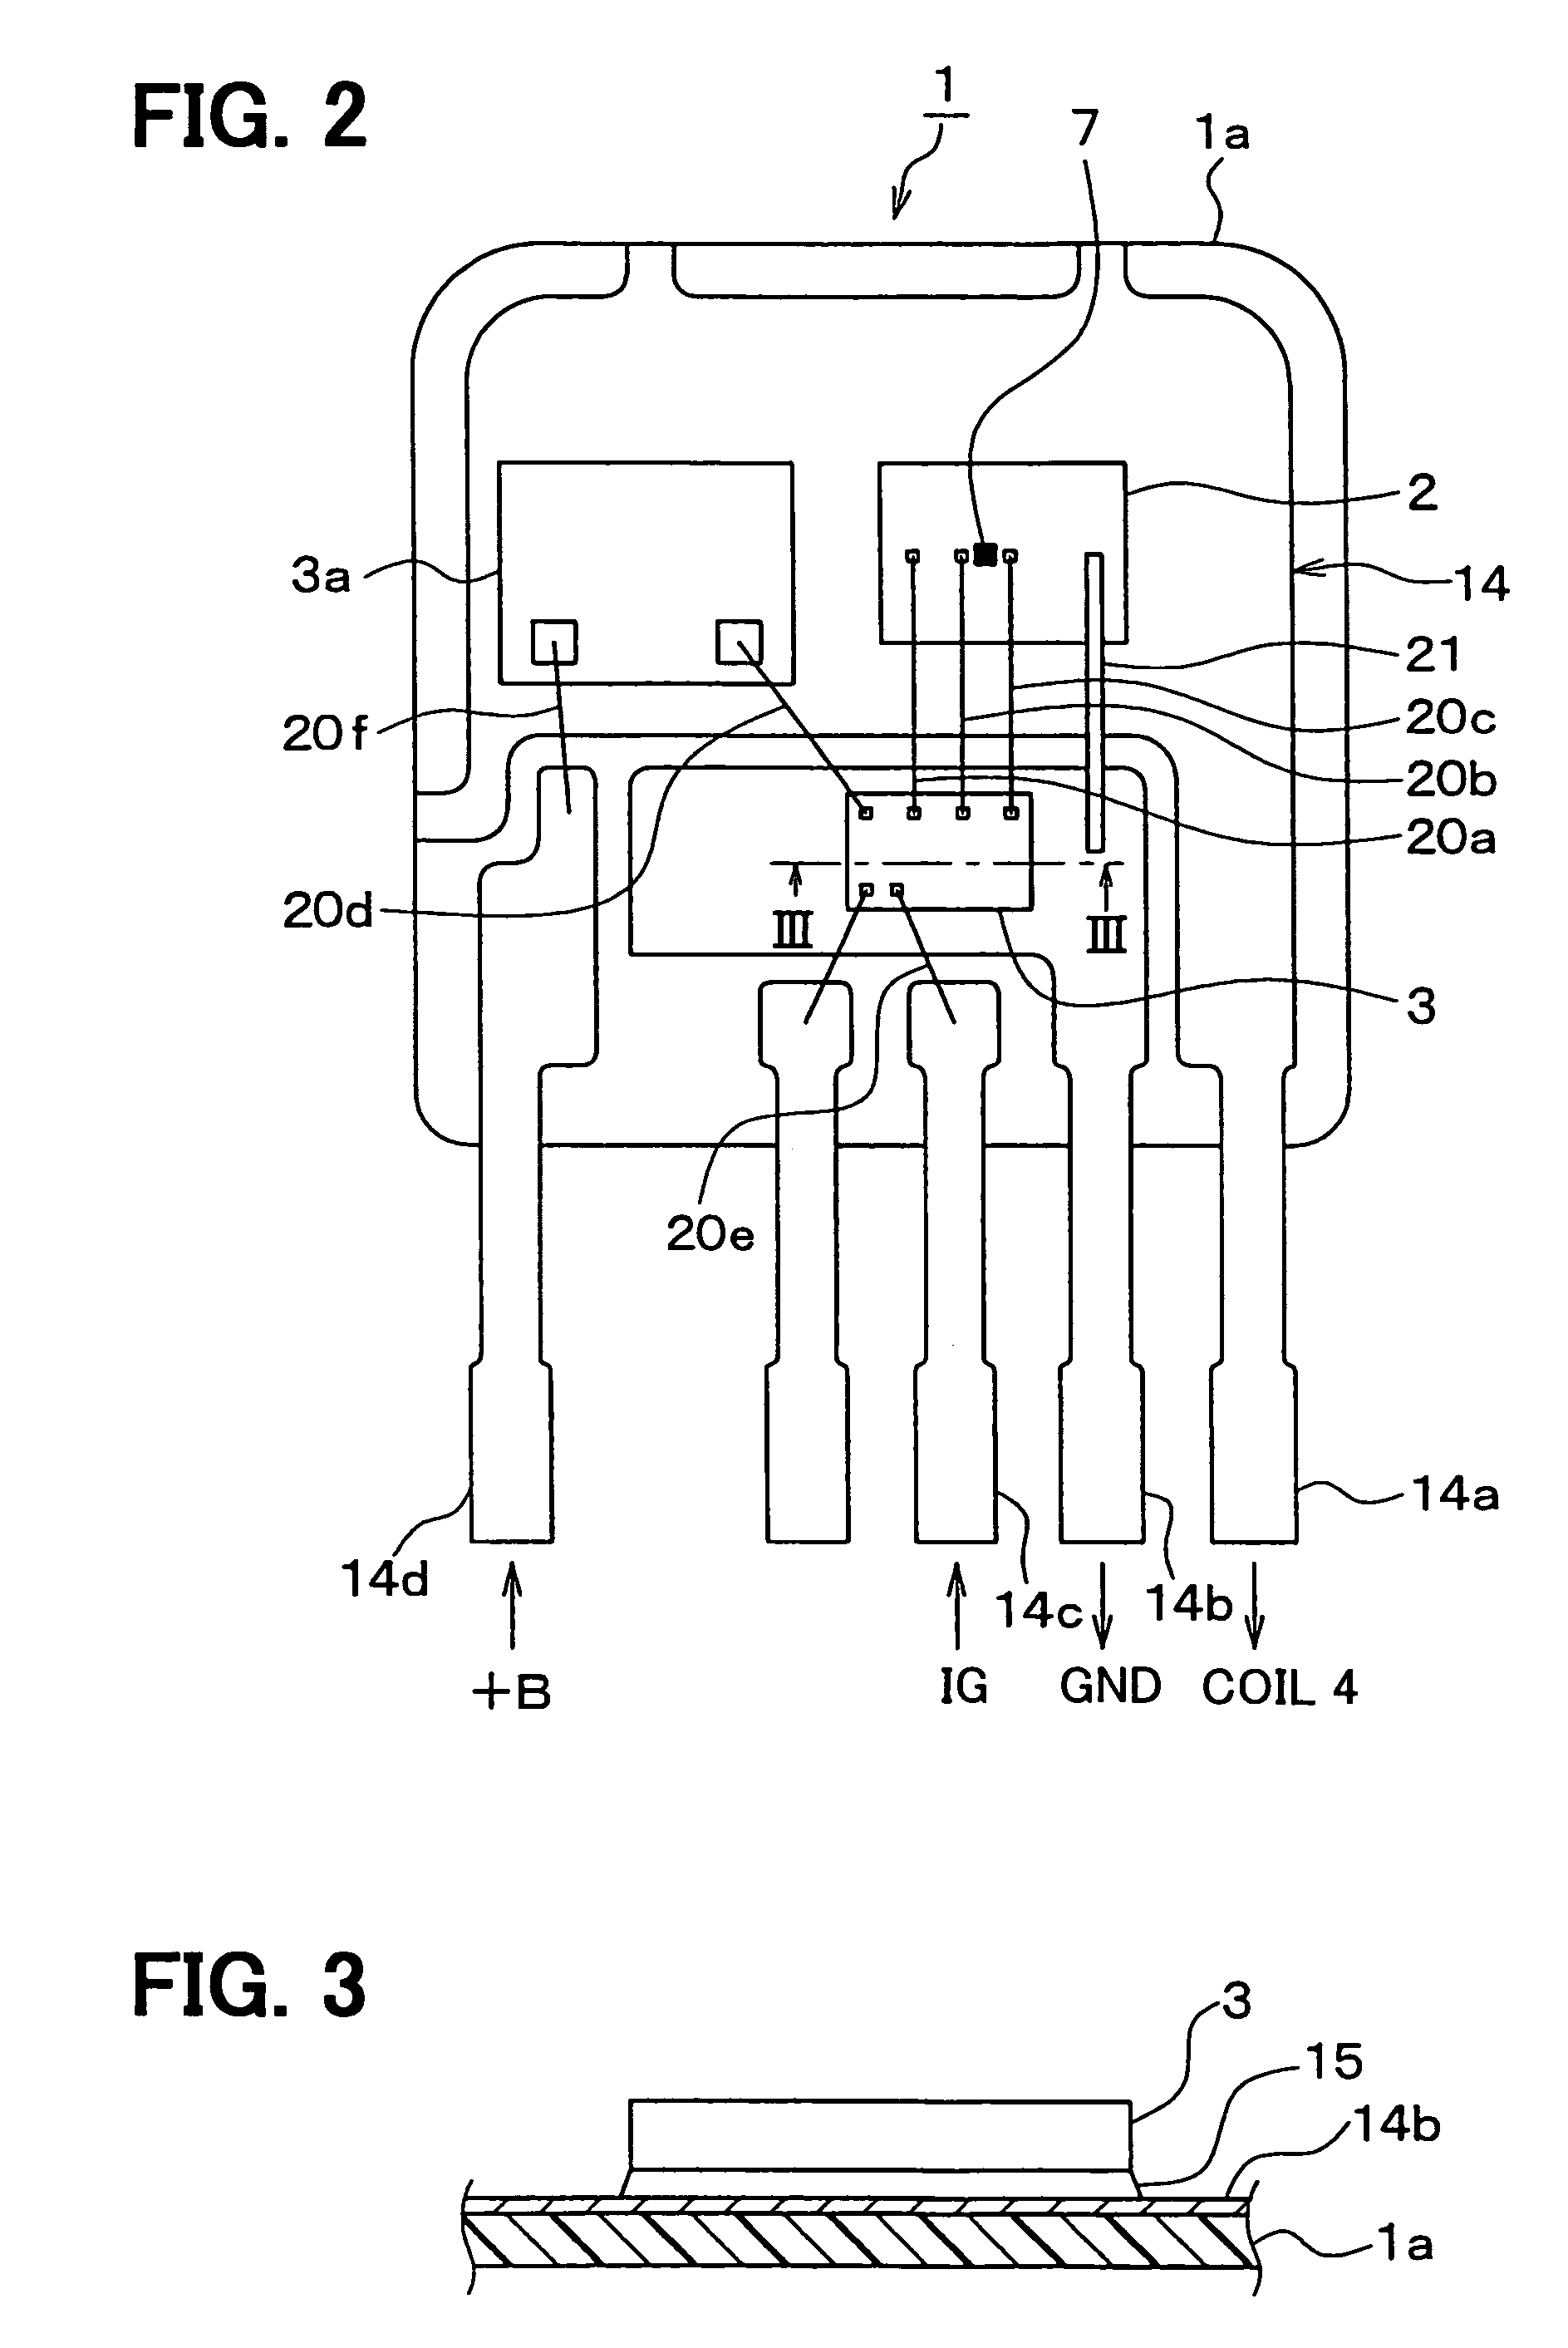 Power switching control device for electric systems